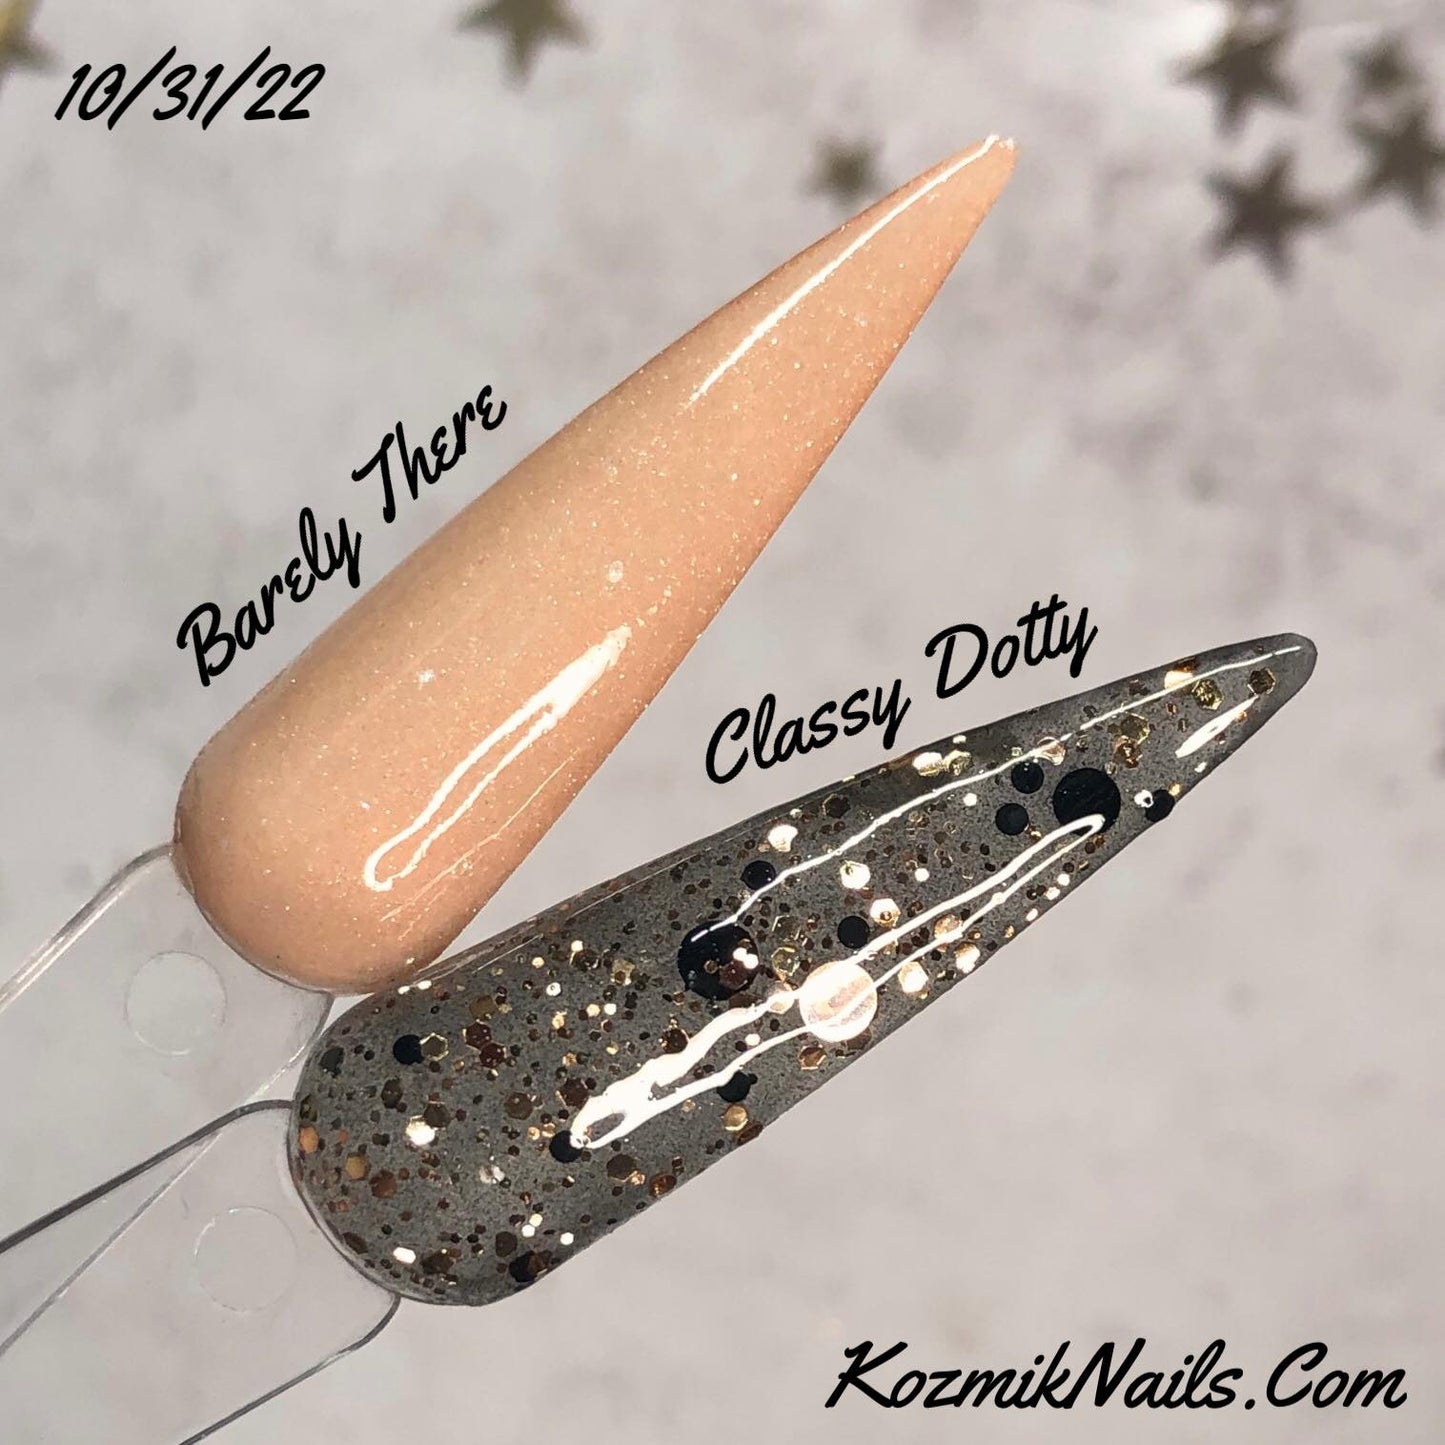 Big Bang Baby! Duo Deal: Barely There / Classy Dotty 10/31/22